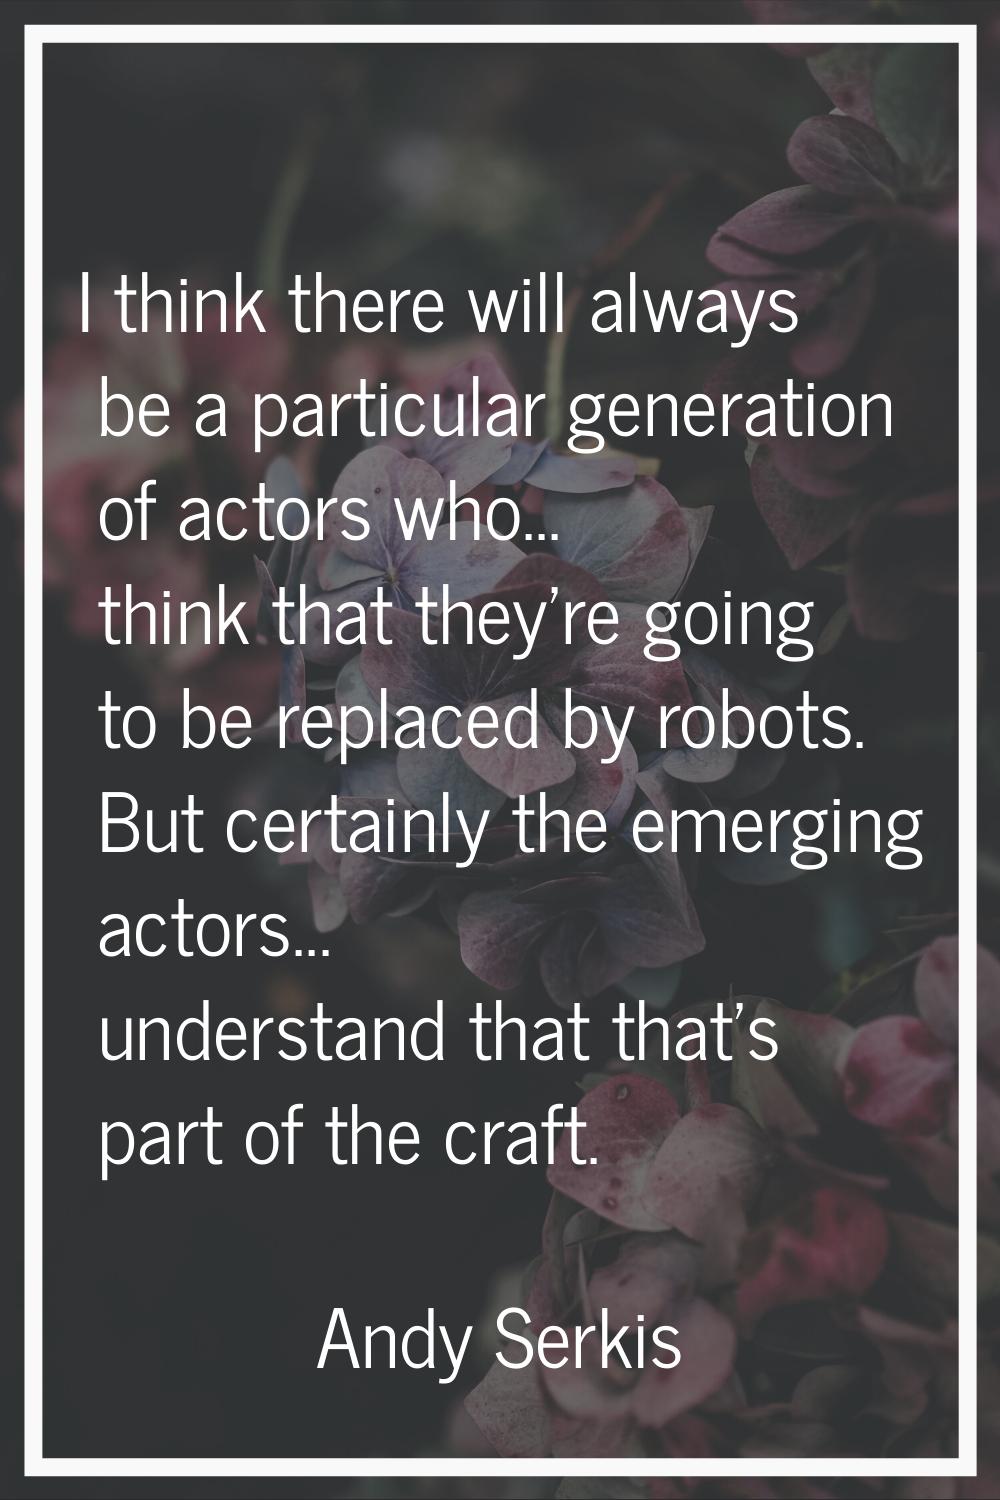 I think there will always be a particular generation of actors who... think that they're going to b